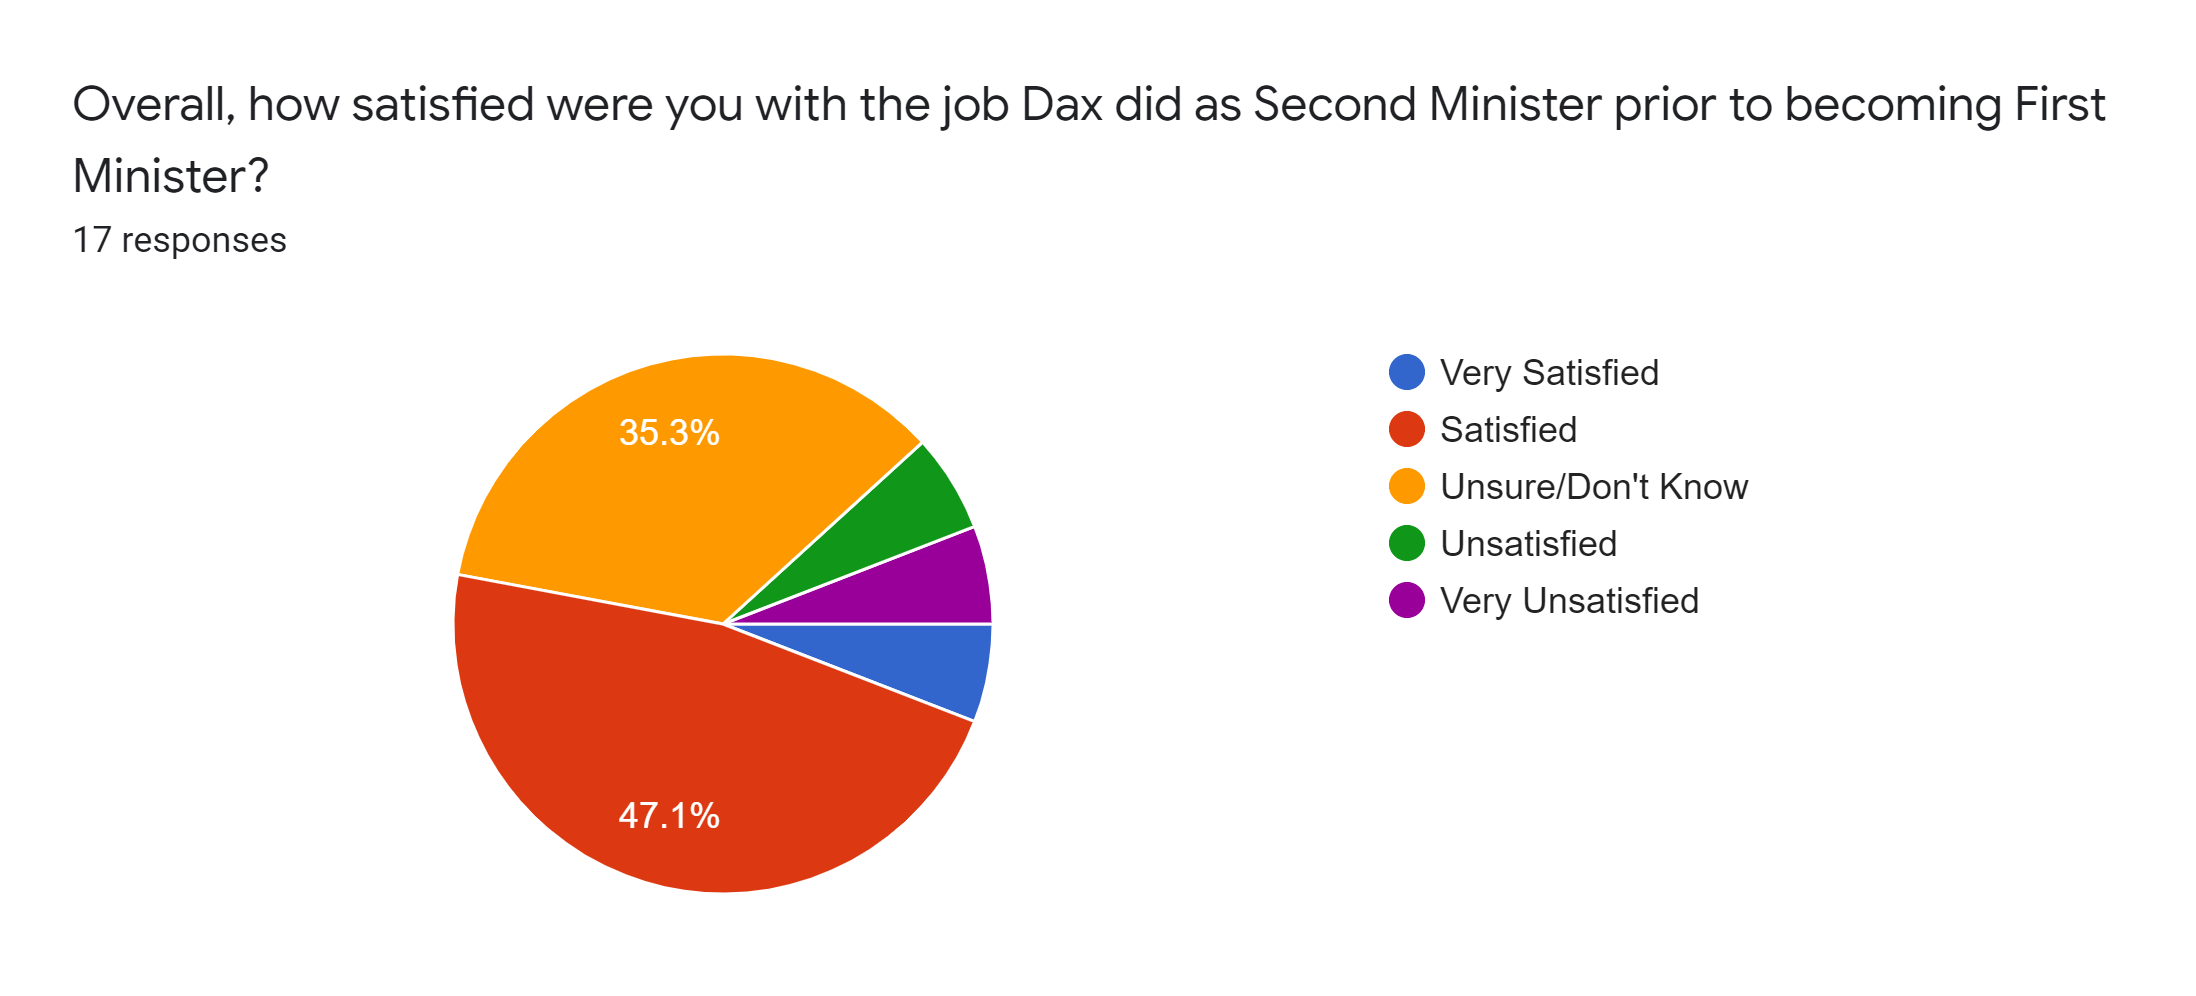 Forms response chart. Question title: Overall, how satisfied were you with the job Dax did as Second Minister prior to becoming First Minister?. Number of responses: 17 responses.